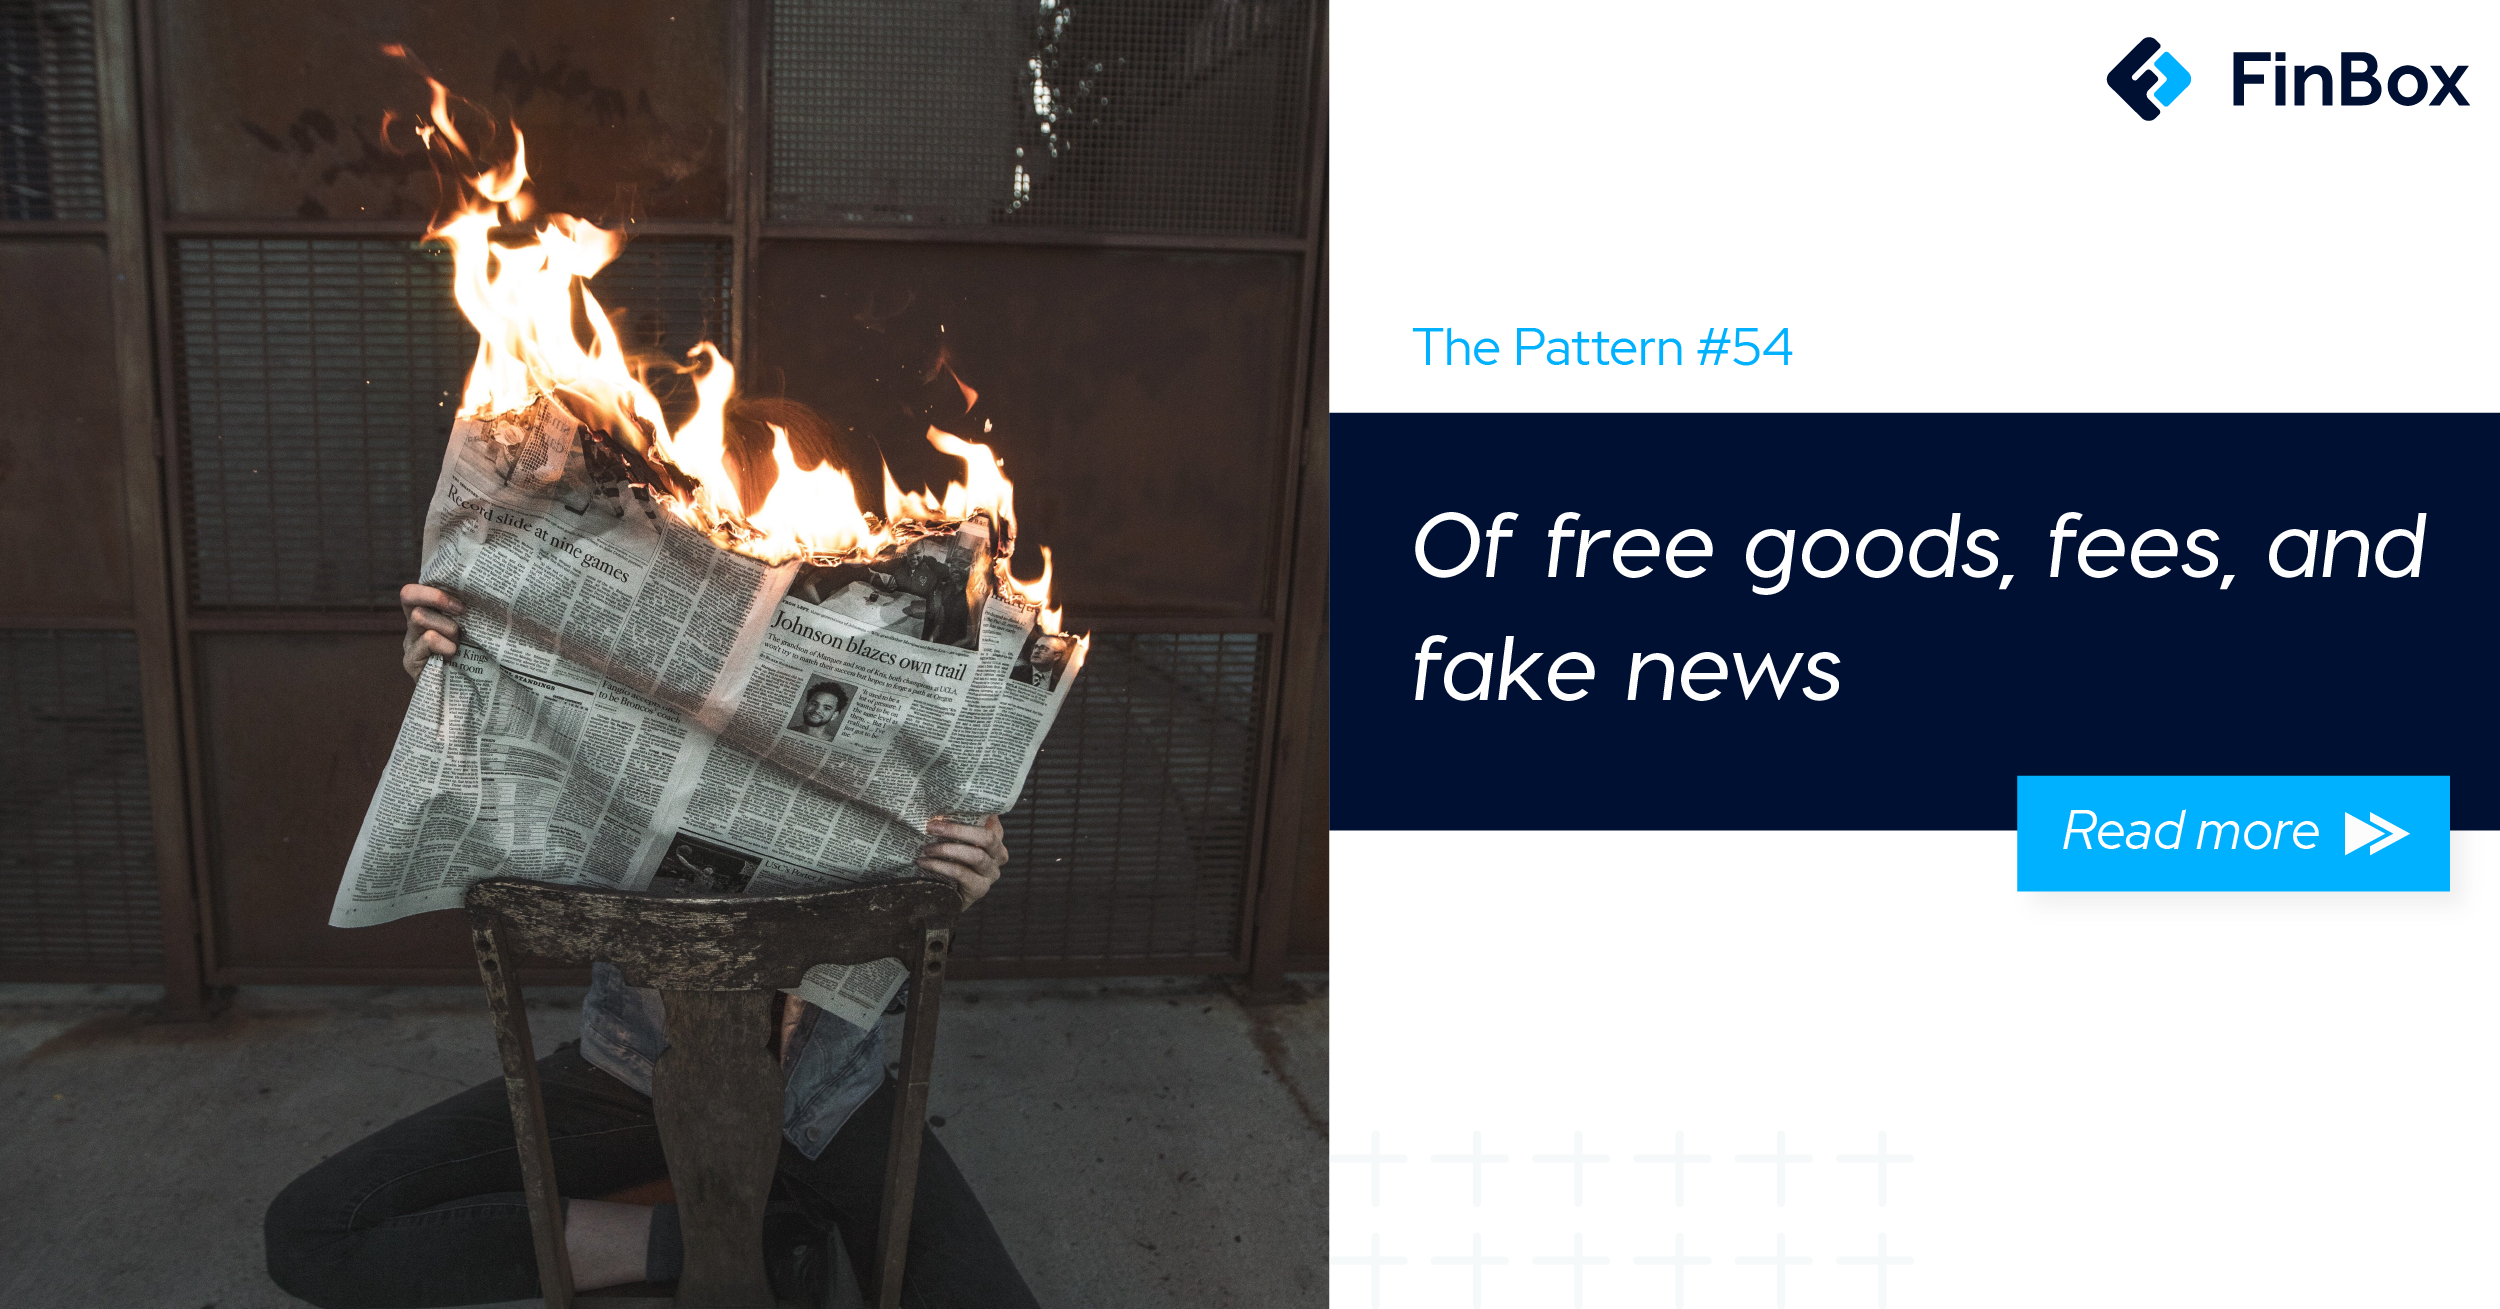 The Pattern #54: Of free goods, fees, and fake news